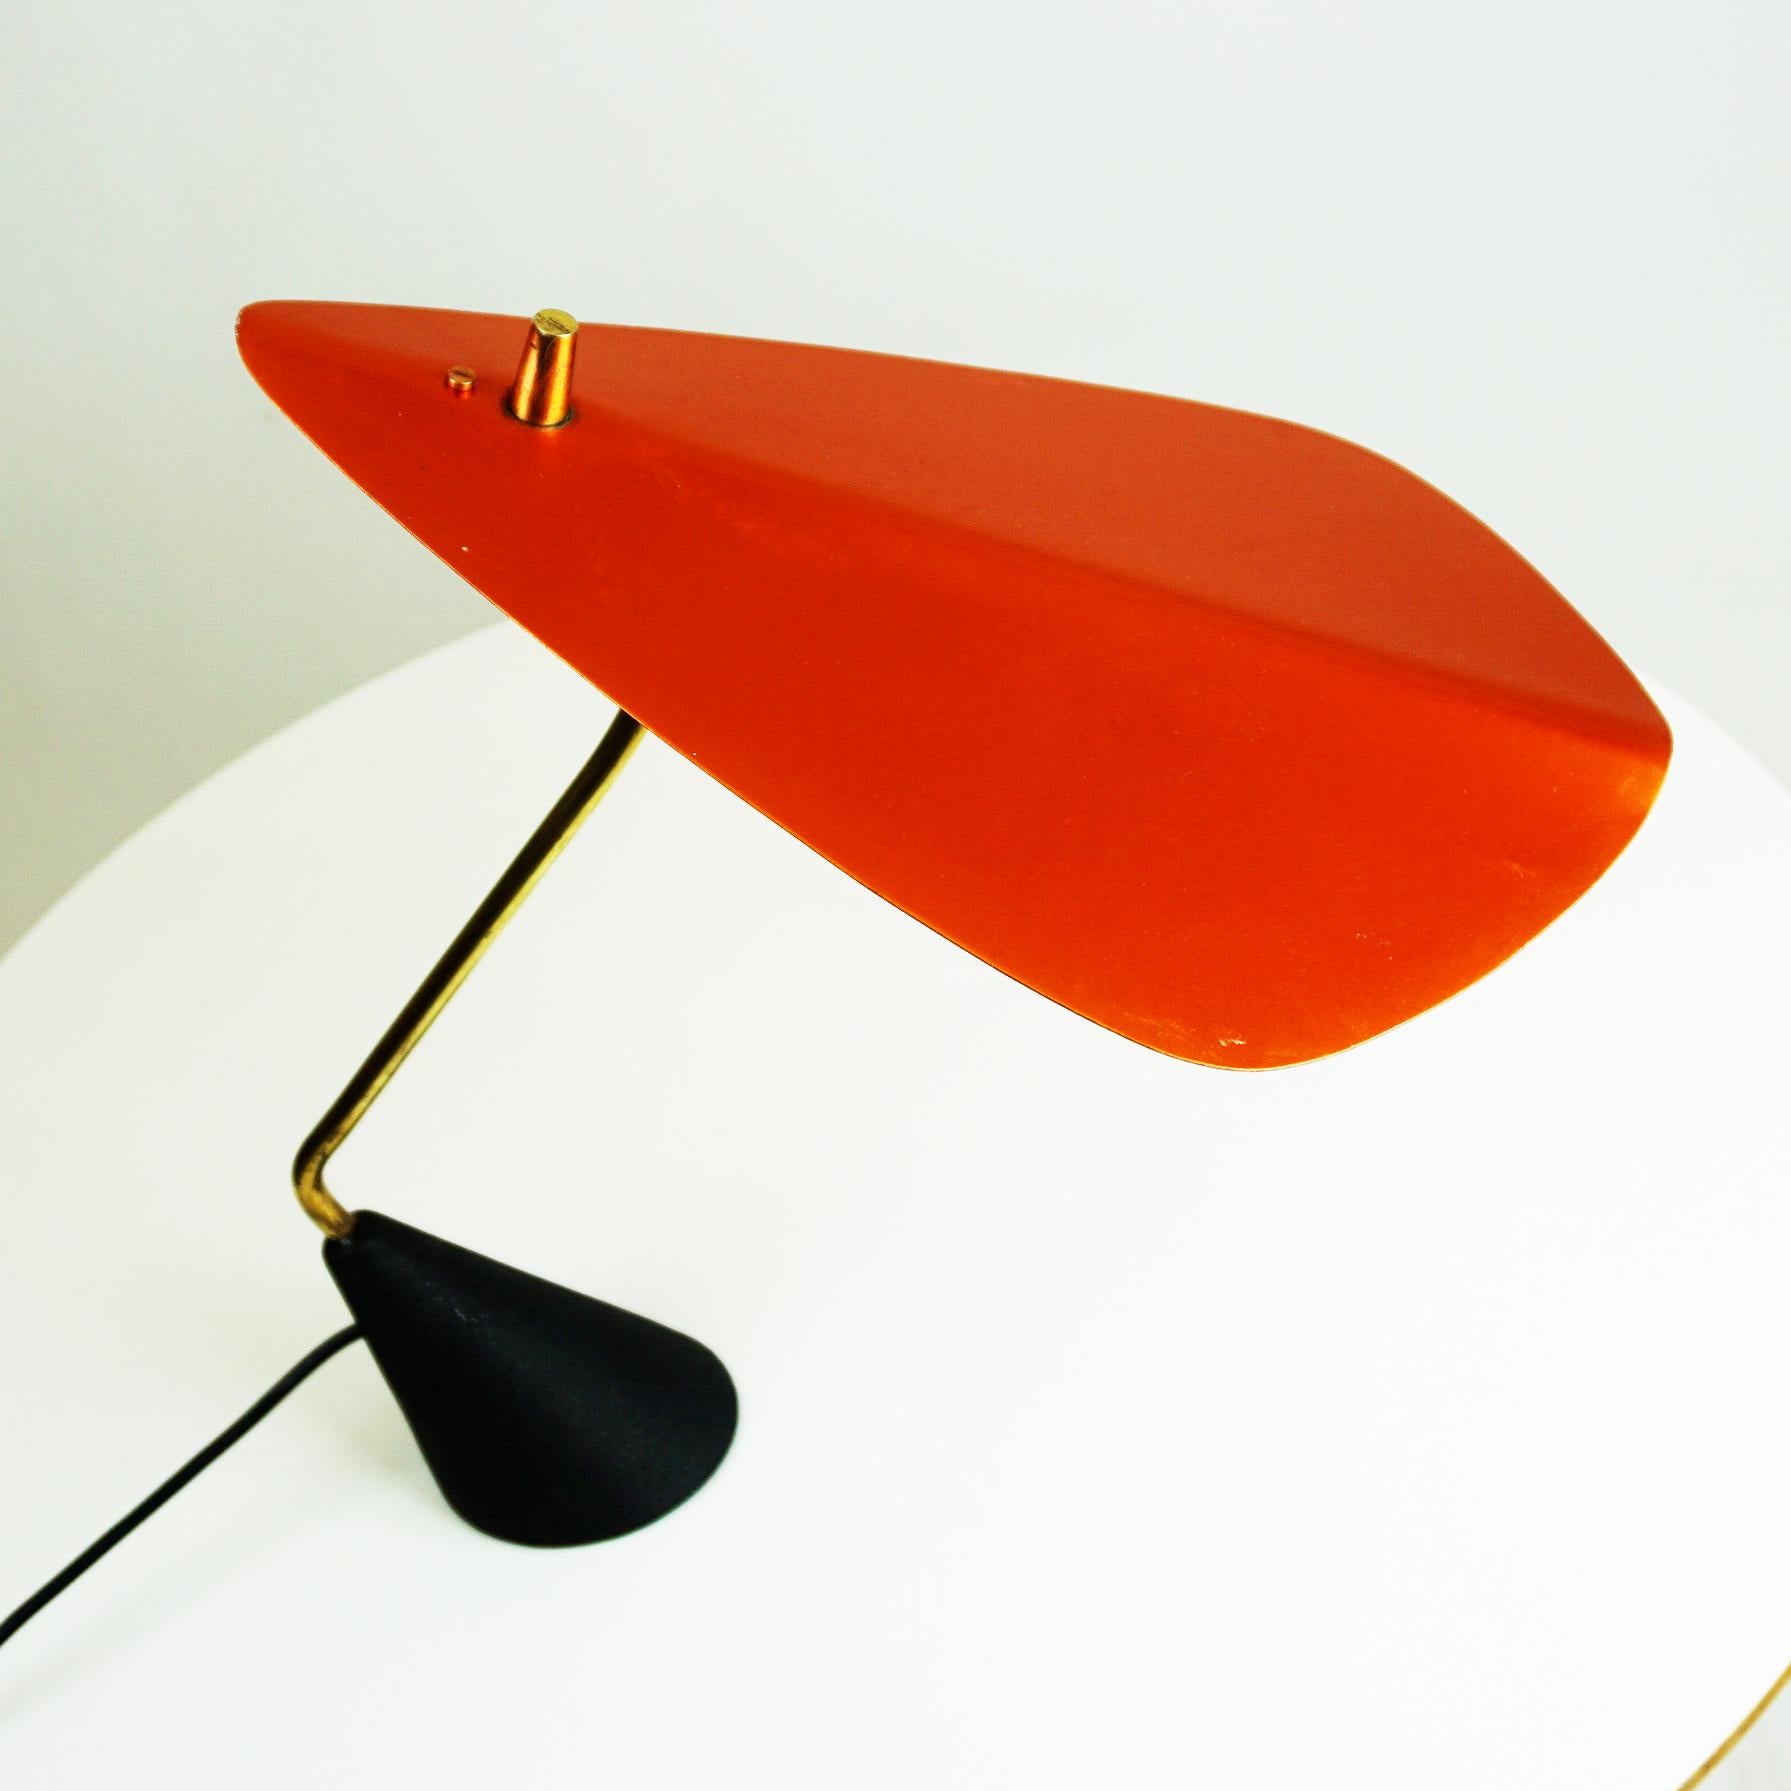 Mid-20th Century Austrian Midcentury Brass and Red Lacquered Metal Table Lamp by Hagenauer Vienna